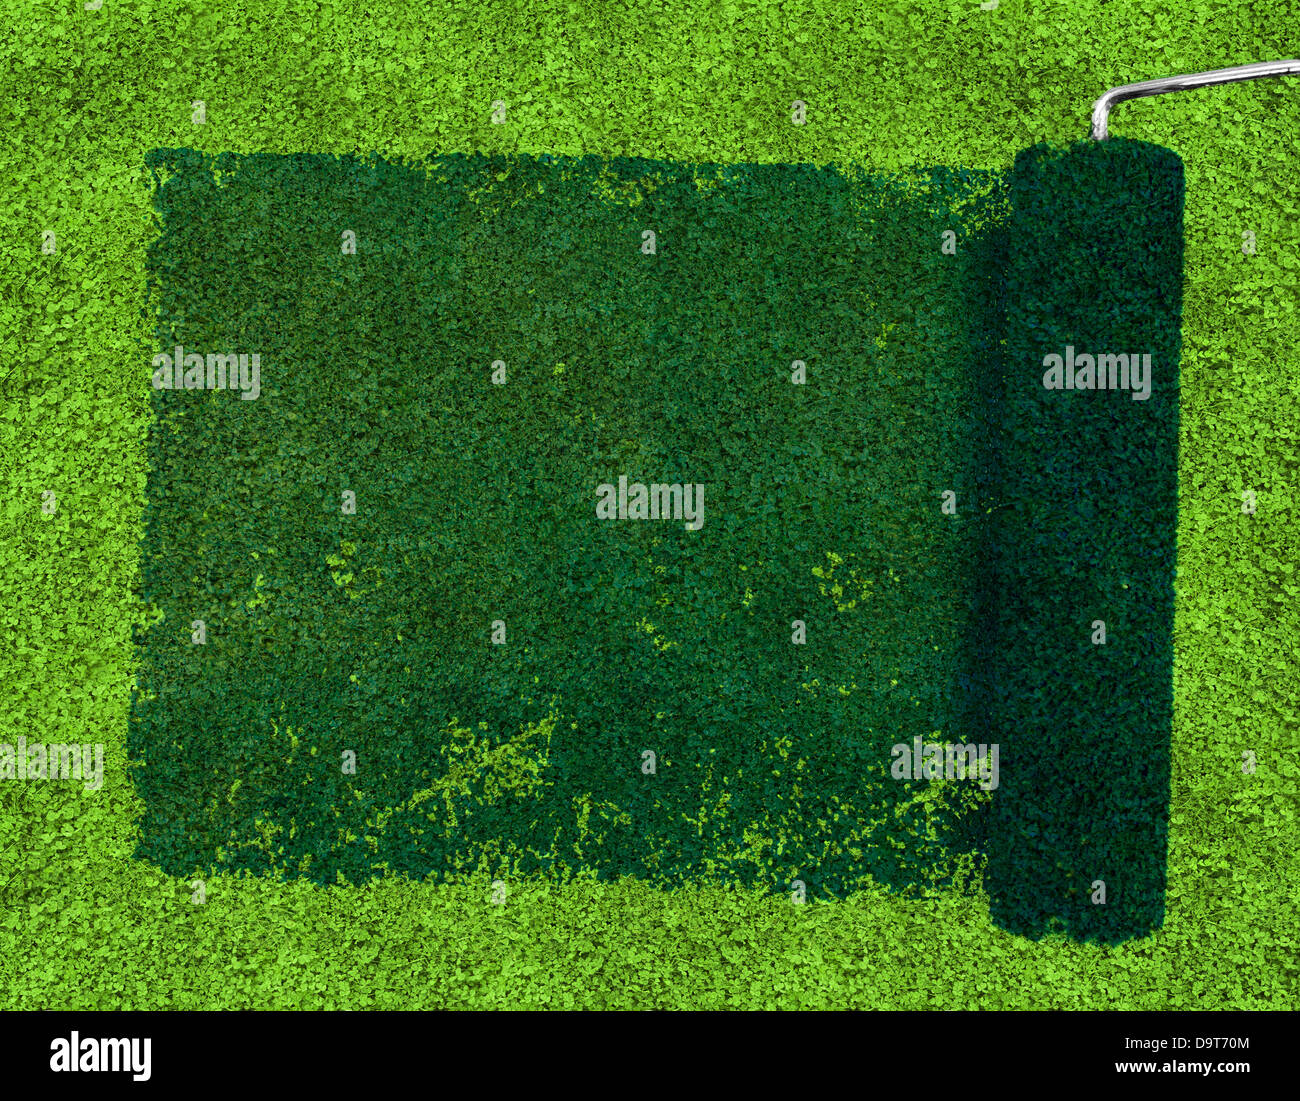 Paint roller over grass Stock Photo